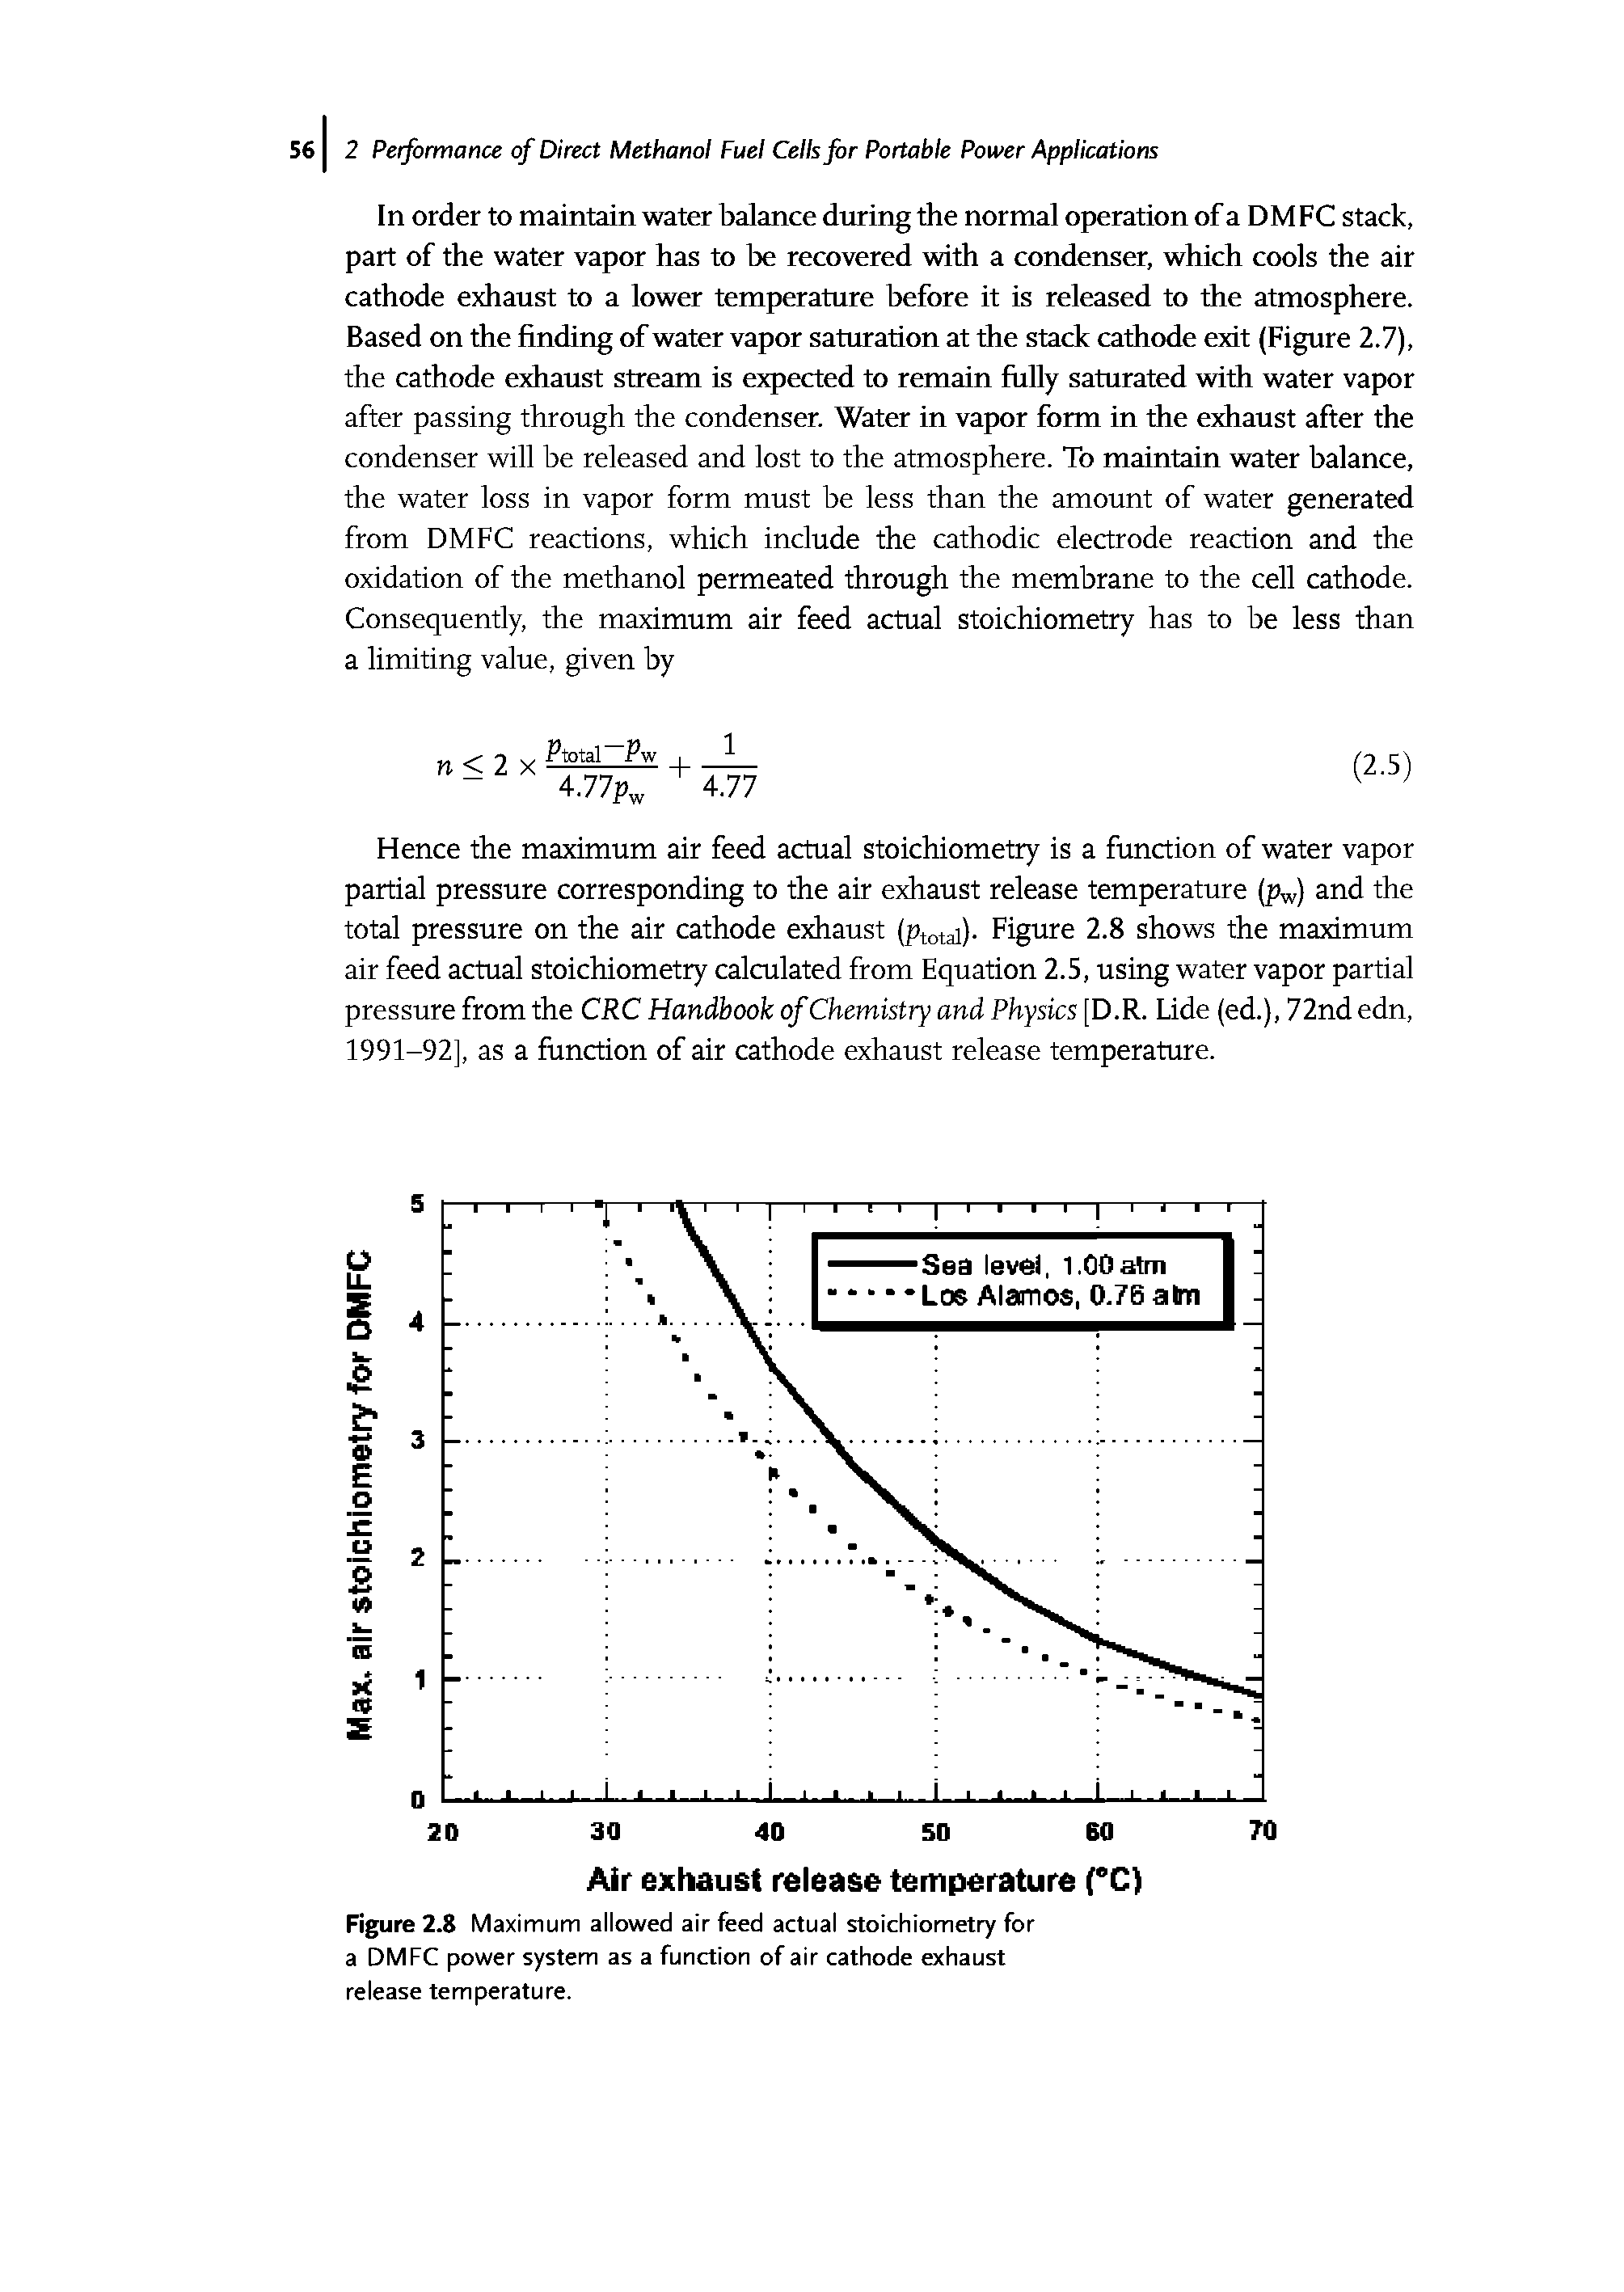 Figure 2.8 Maximum allowed air feed actual stoichiometry for a DMFC power system as a function of air cathode exhaust release temperature.